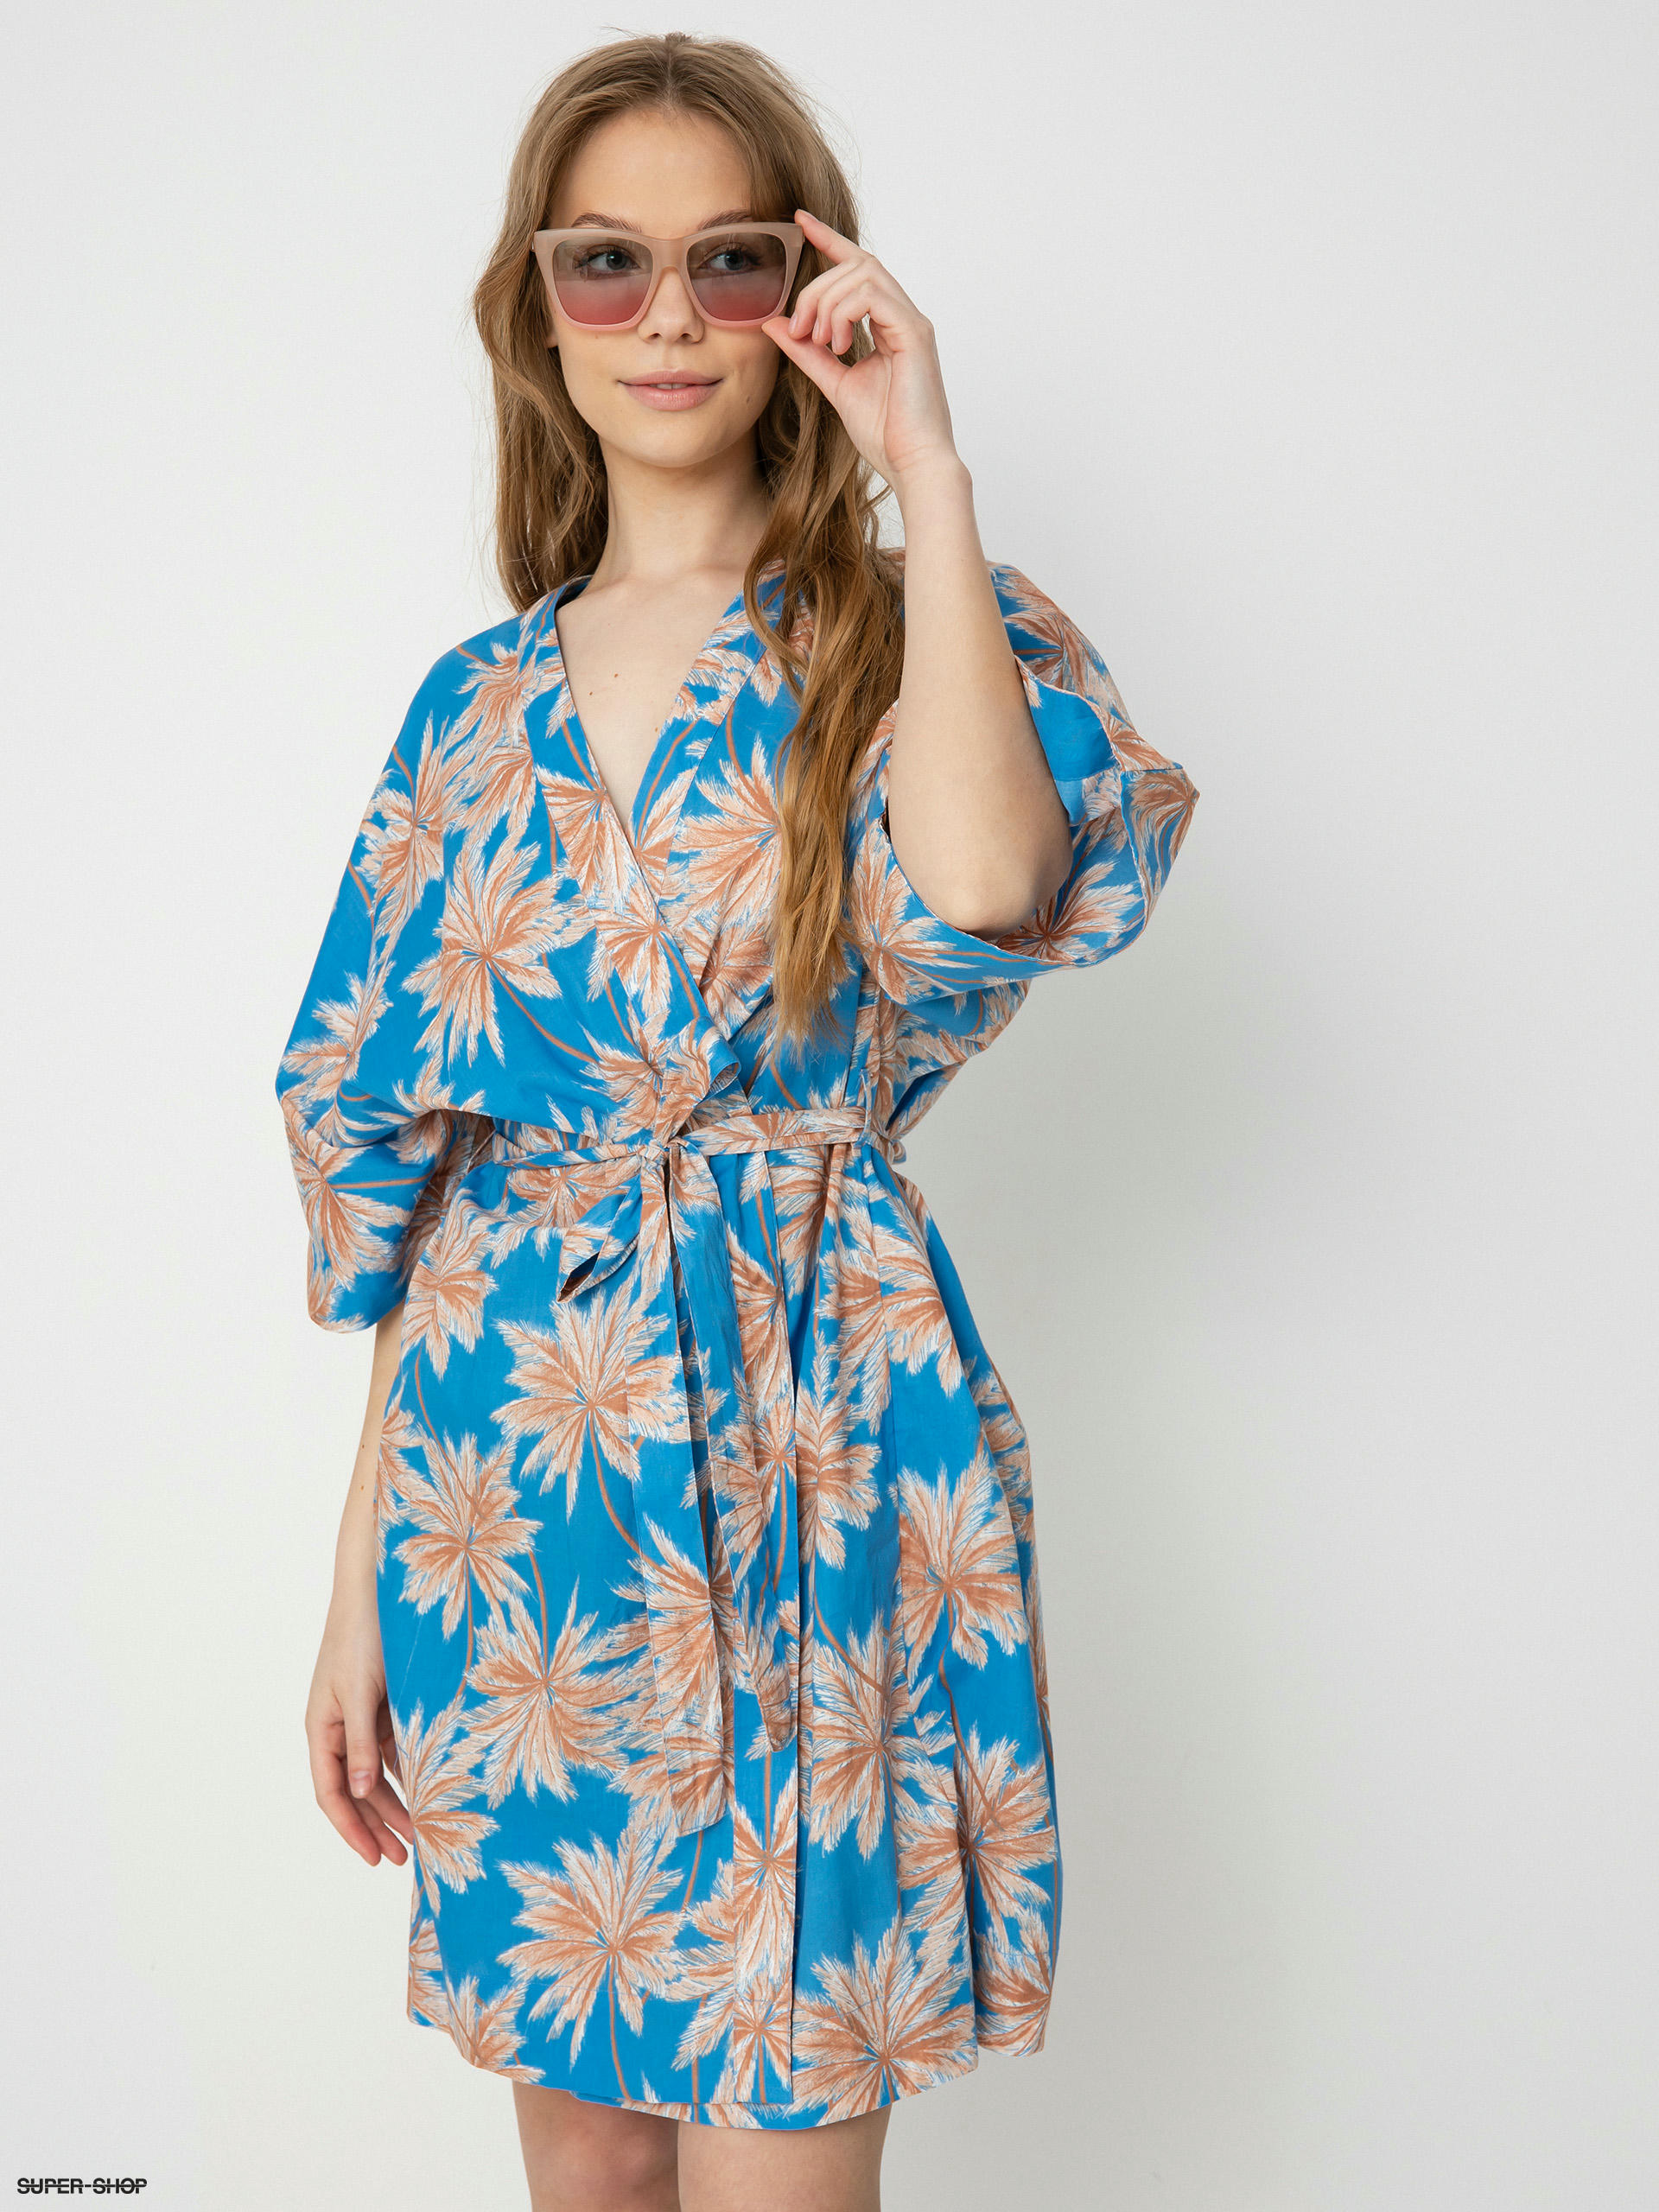 Sunny Moments - Kimono Cover Up for Women